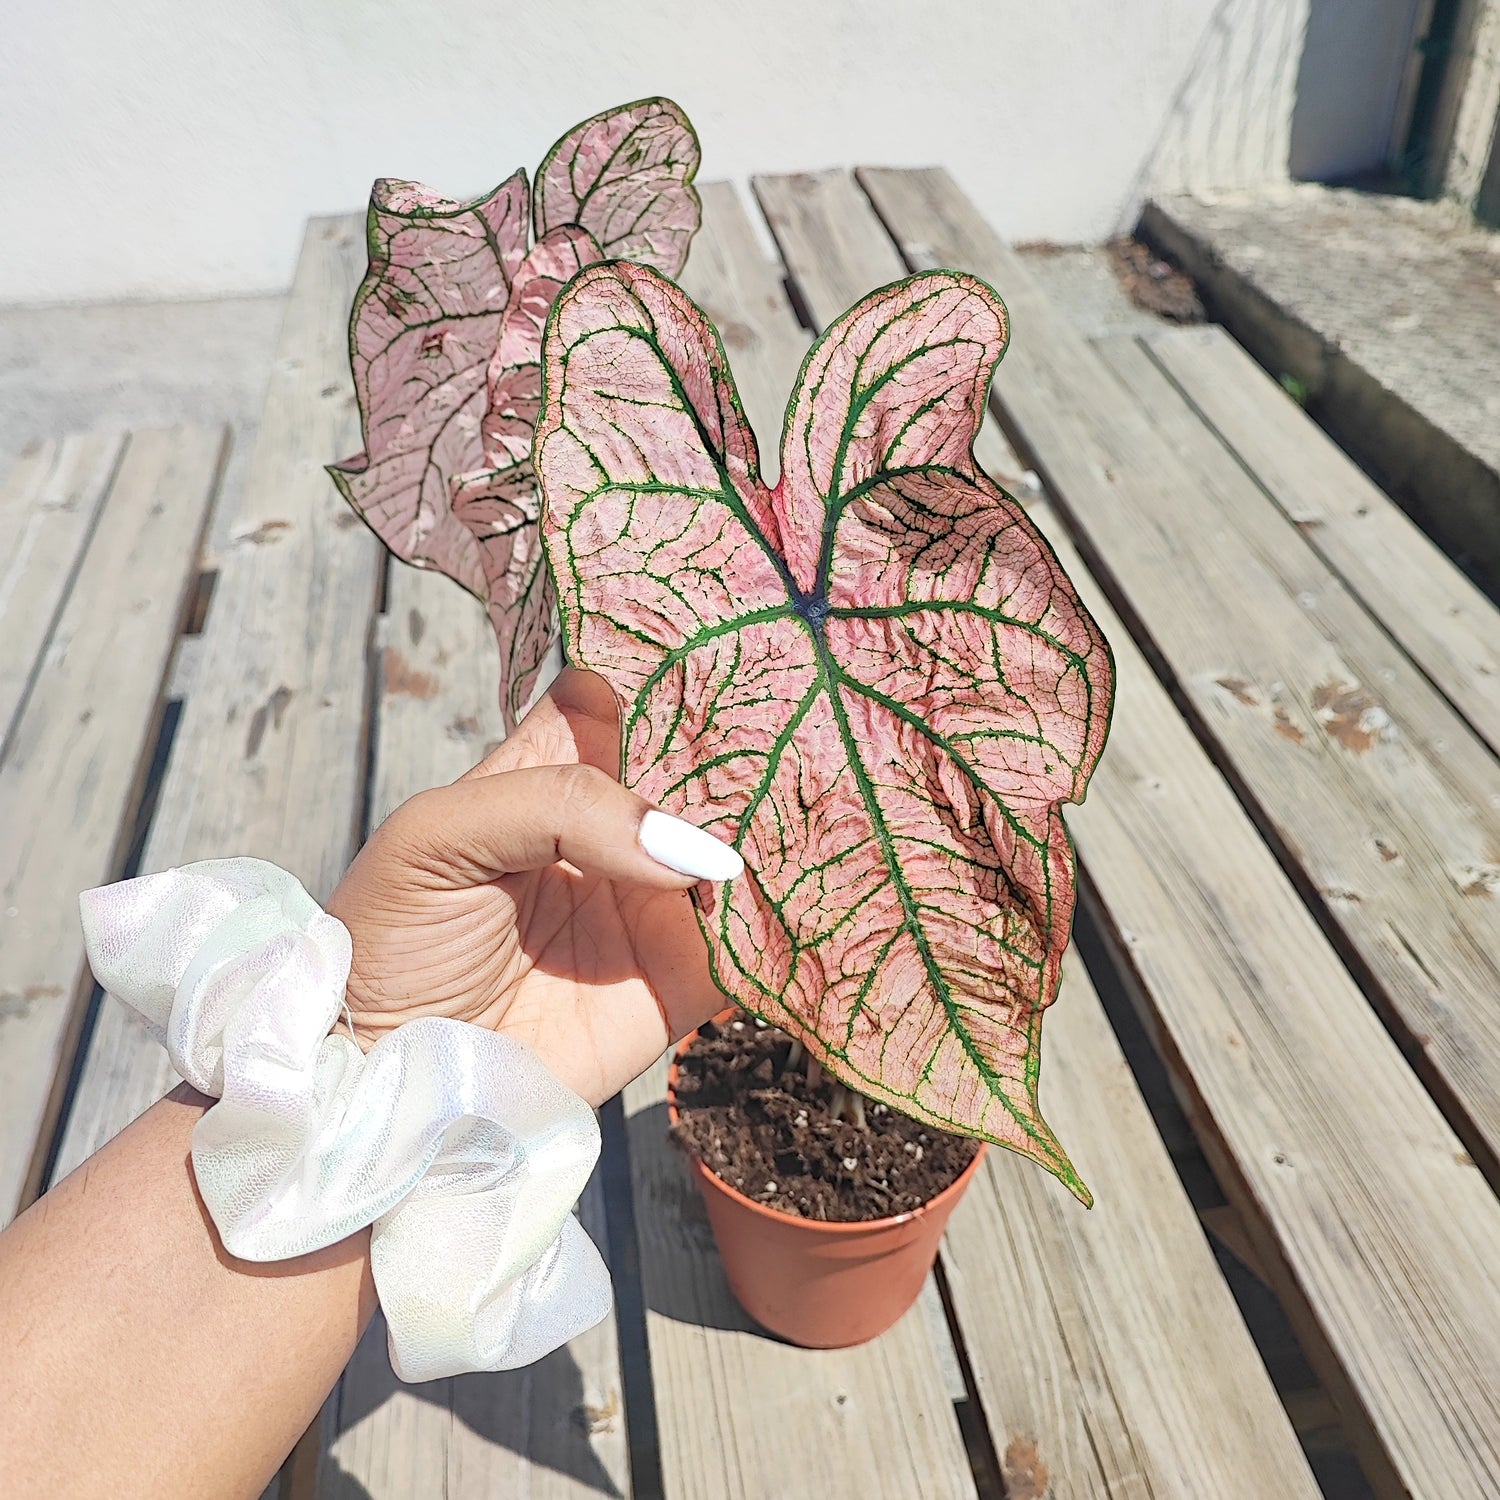 Caladium Spring Fling cutting (L), plant with fuzzy leaves